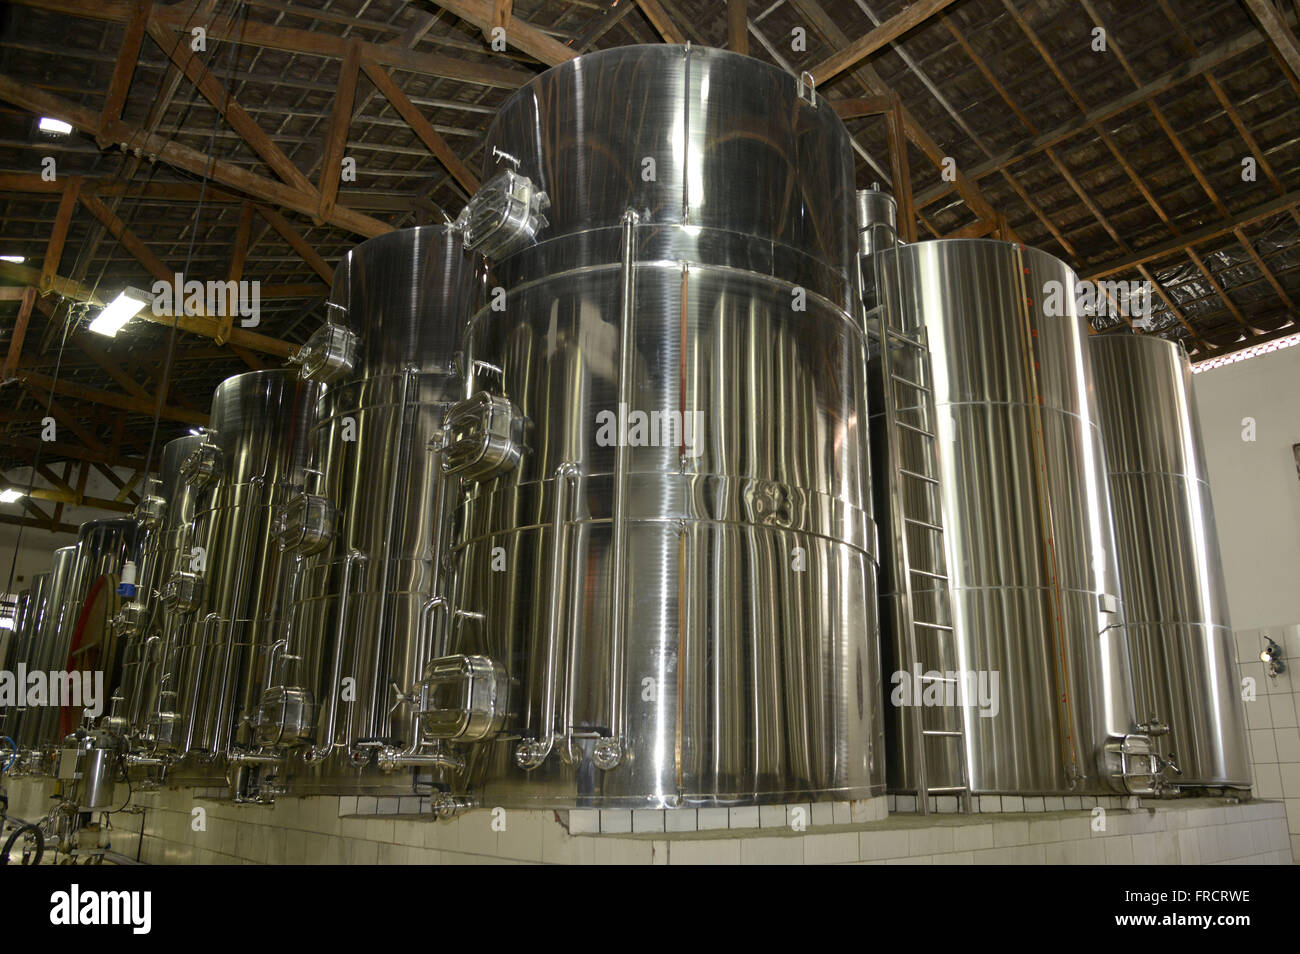 Inside view of wine in stainless steel vats Stock Photo